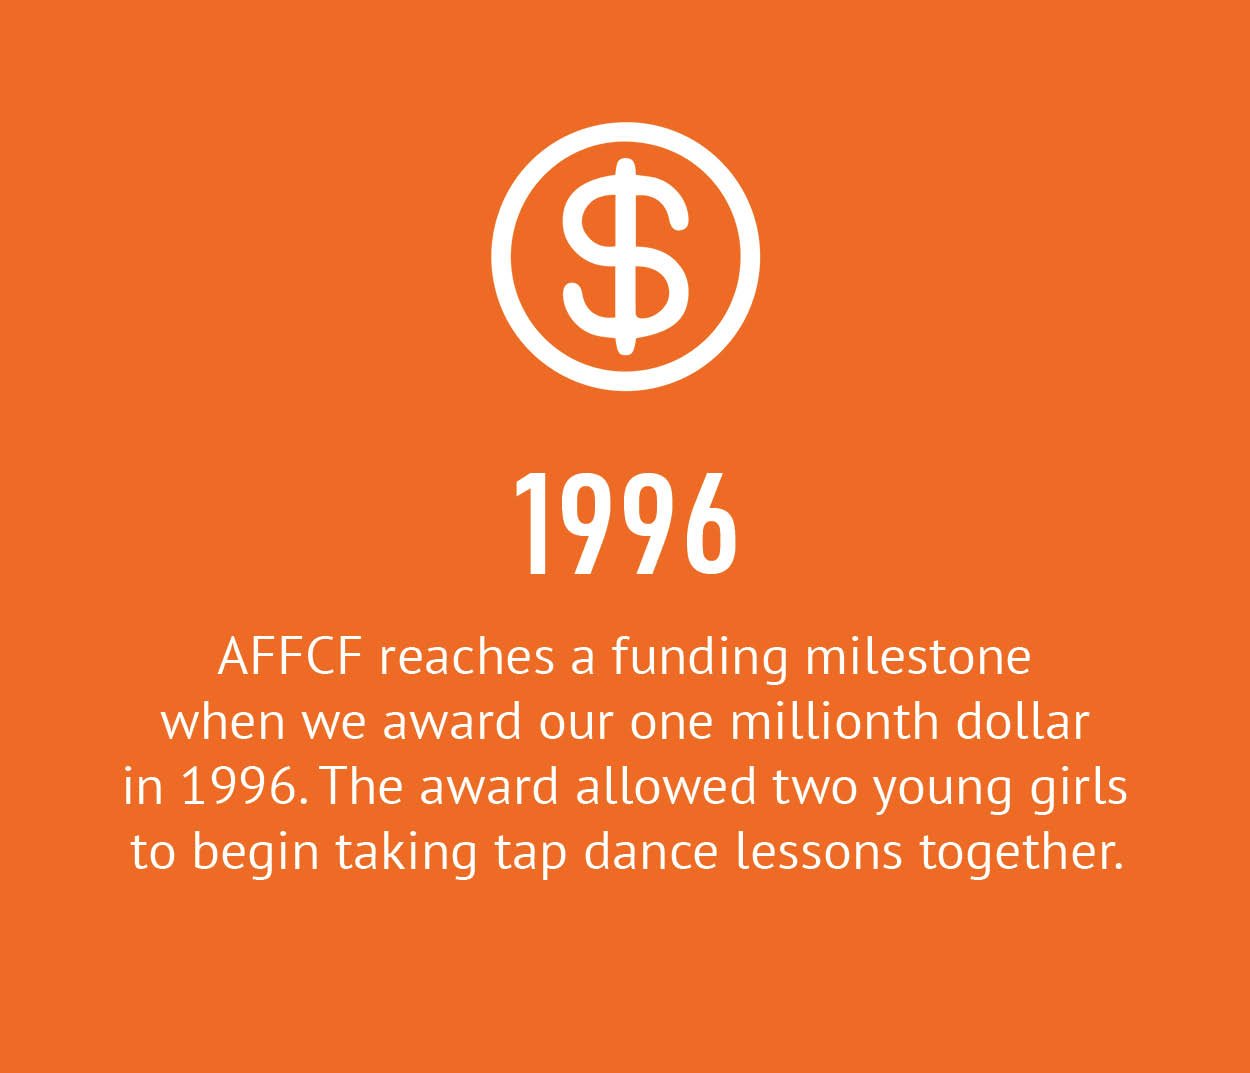 1996 - AFFCF reaches a funding milestone when we award our one millionth dollar in 1996. The award allowed two young girls to begin taking tap dance lessons together.